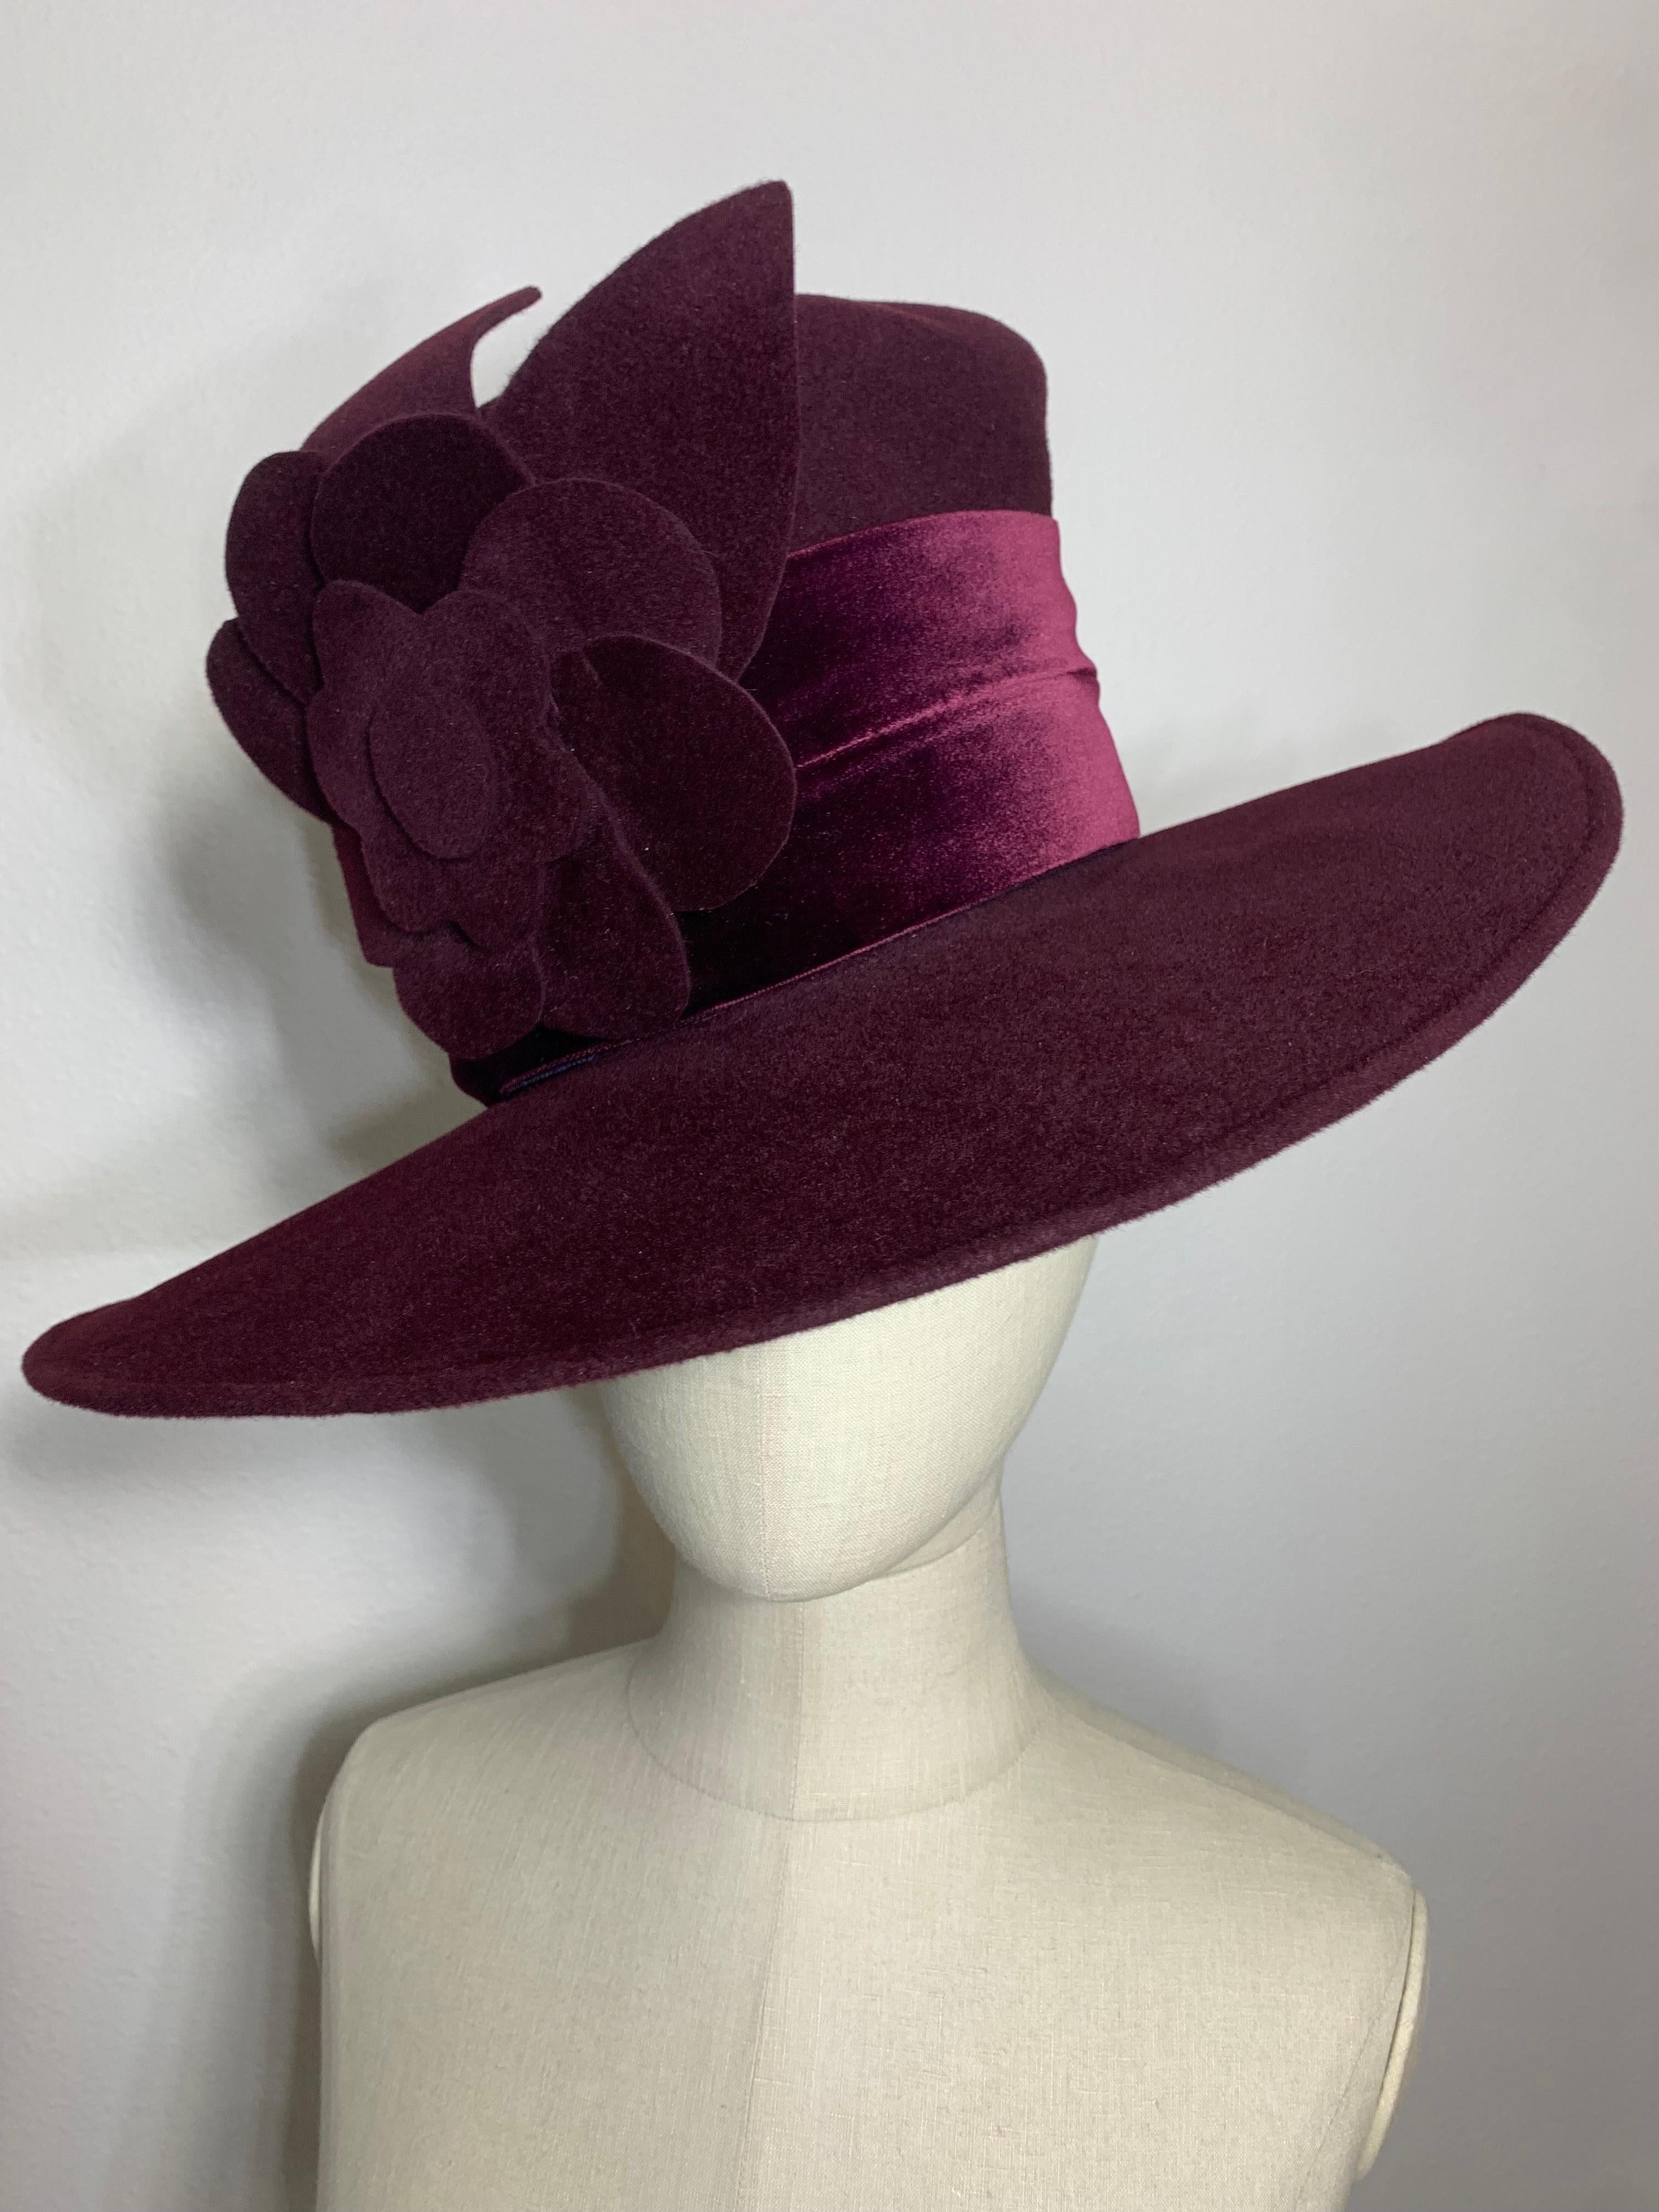 Maison Michel Autumn/Winter Aubergine Medium Brim Felt  Beautifully Blocked High Top Hat with Matching Flower & Wide Velvet Band: Unlabeled, with attached combs for securing. Size 6 7/8 Medium. Made in France. 